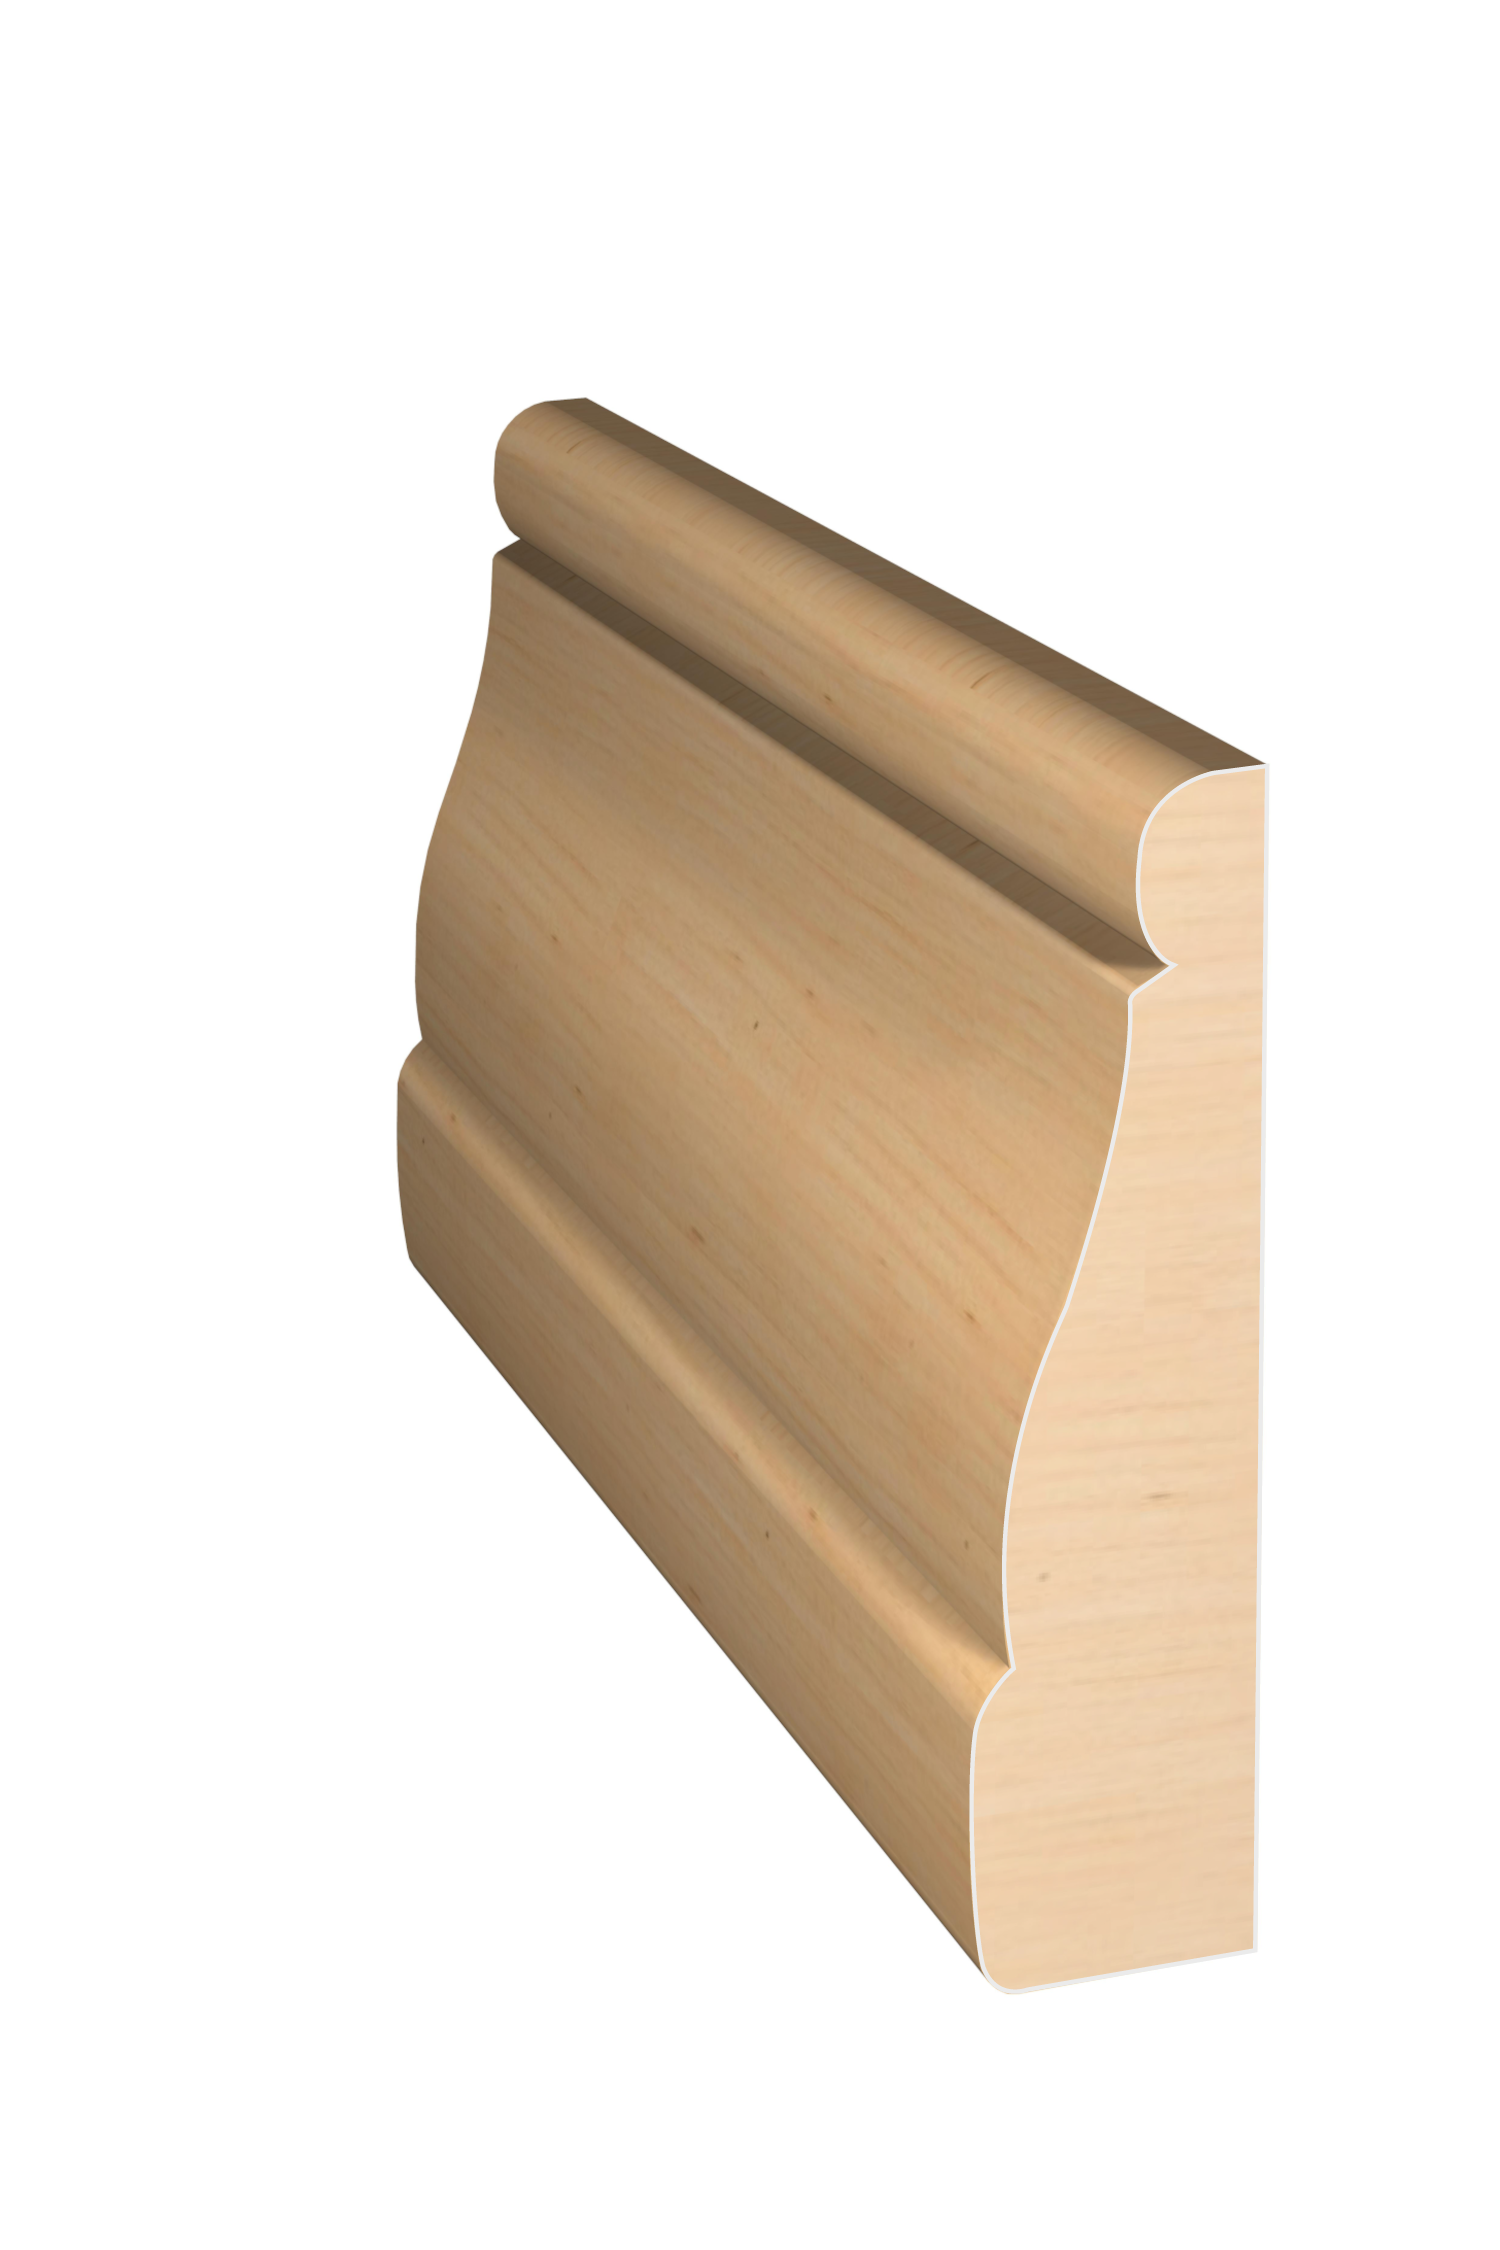 Three dimensional rendering of custom casing wood molding CAPL31413 made by Public Lumber Company in Detroit.